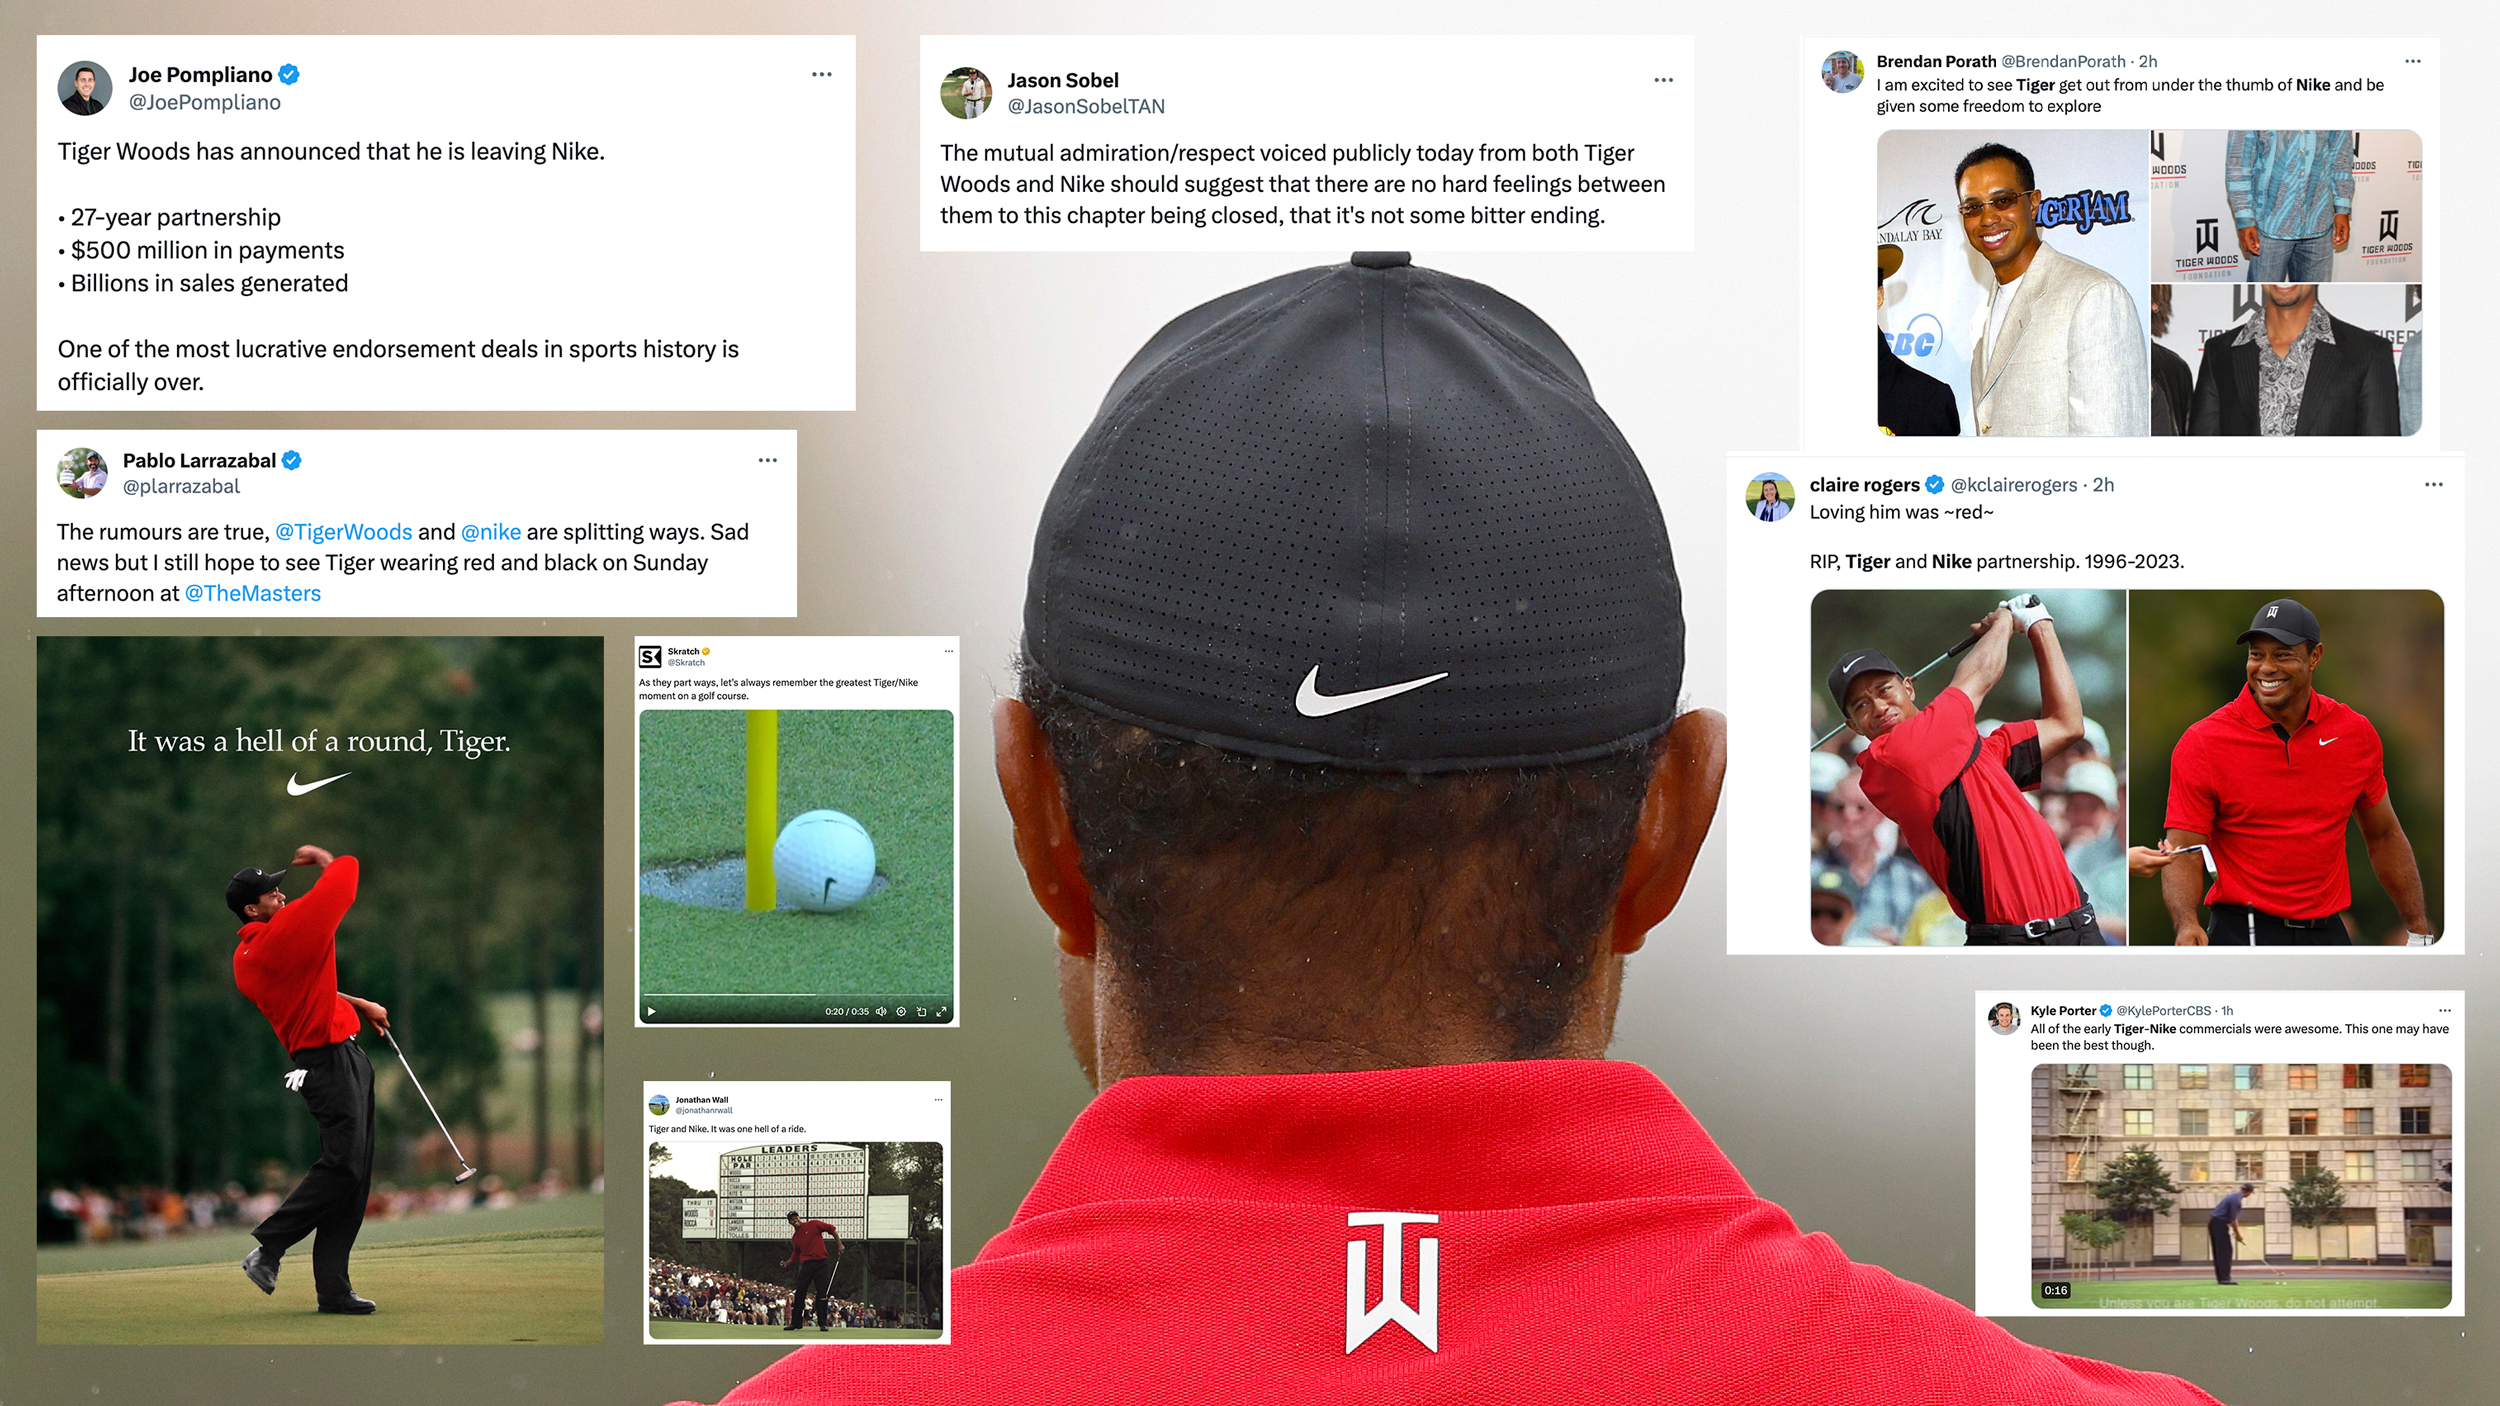 End of an Era as Tiger Woods, Nike Part Ways